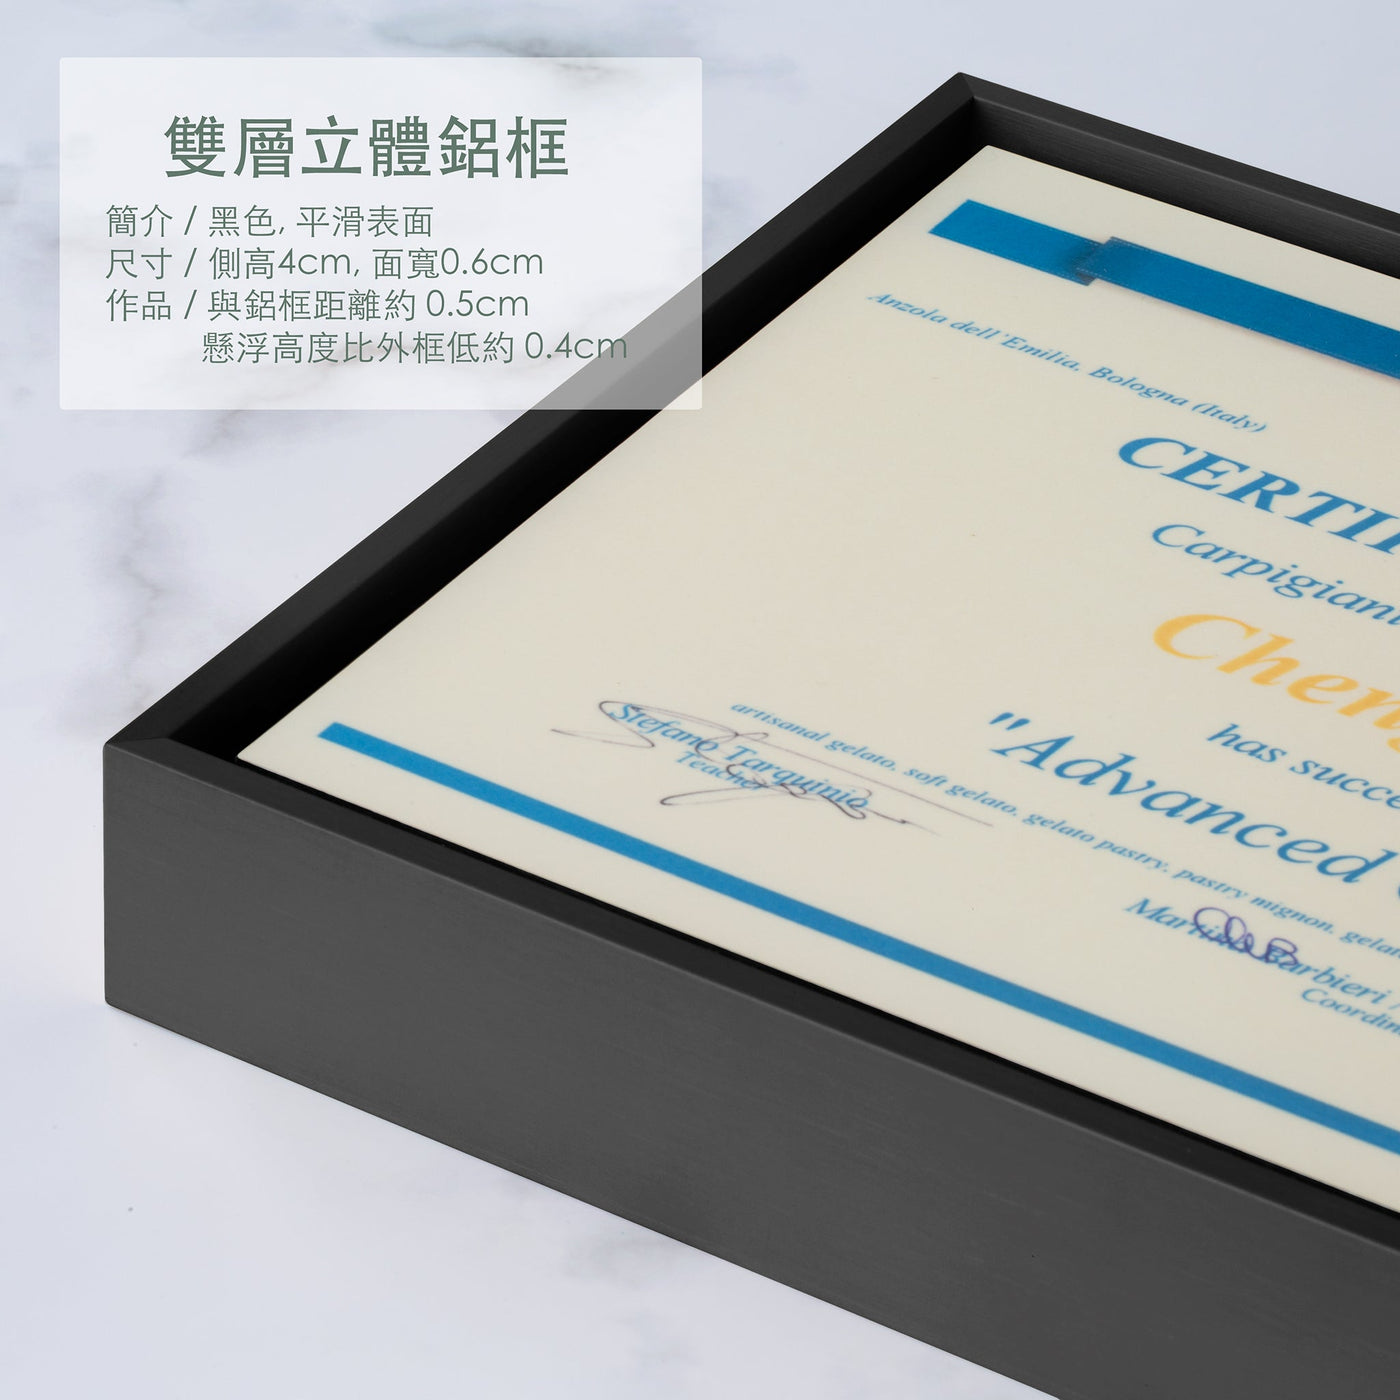 Awards Certificate Graphic Work Printed within 24 x 16" (61 x 40.6cm)